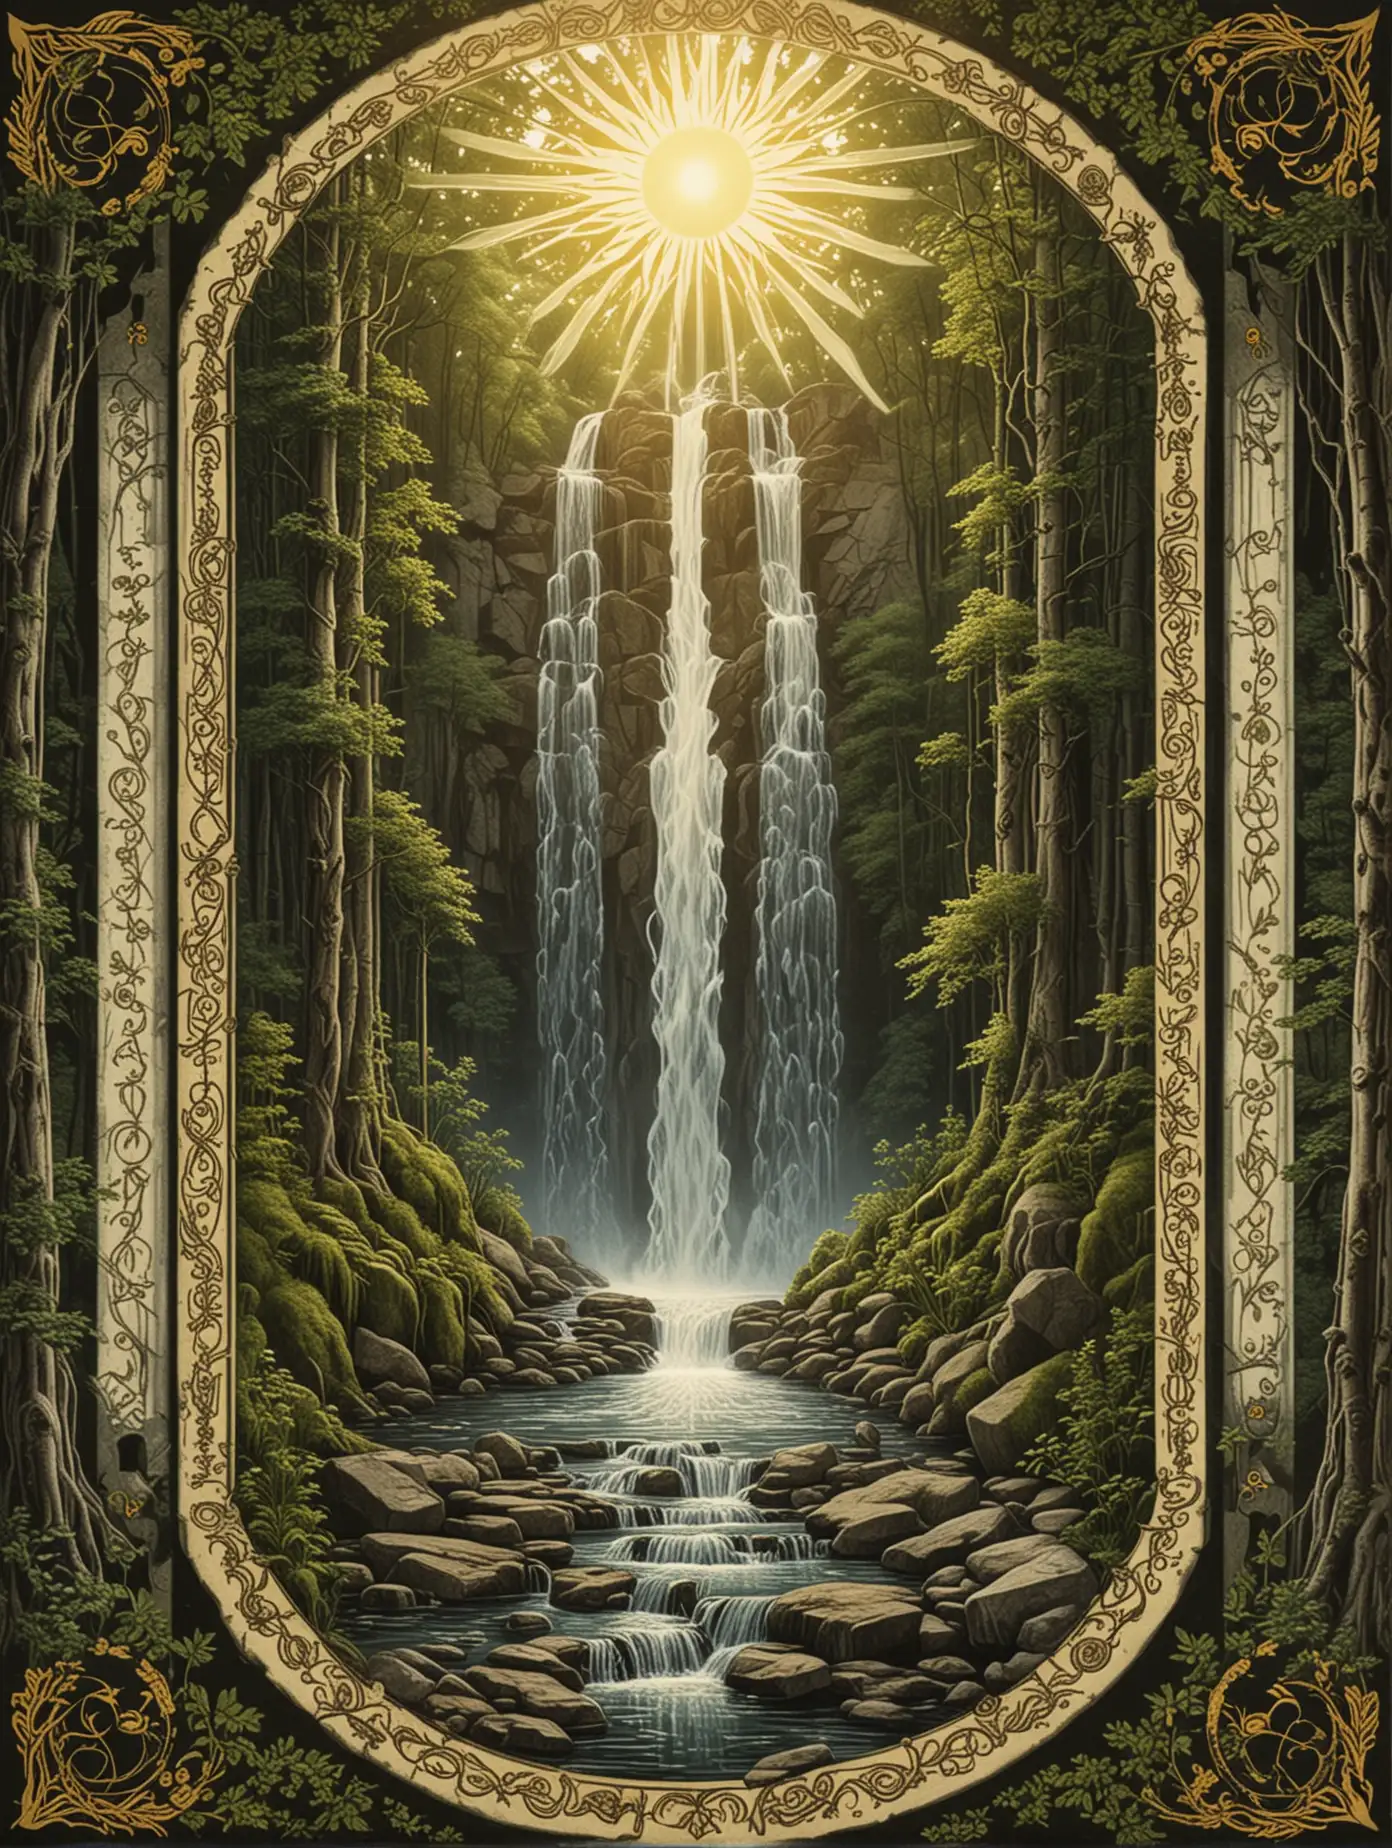 Slavic-Style-Tarot-Card-with-Symmetrical-Forest-Waterfall-and-Sun